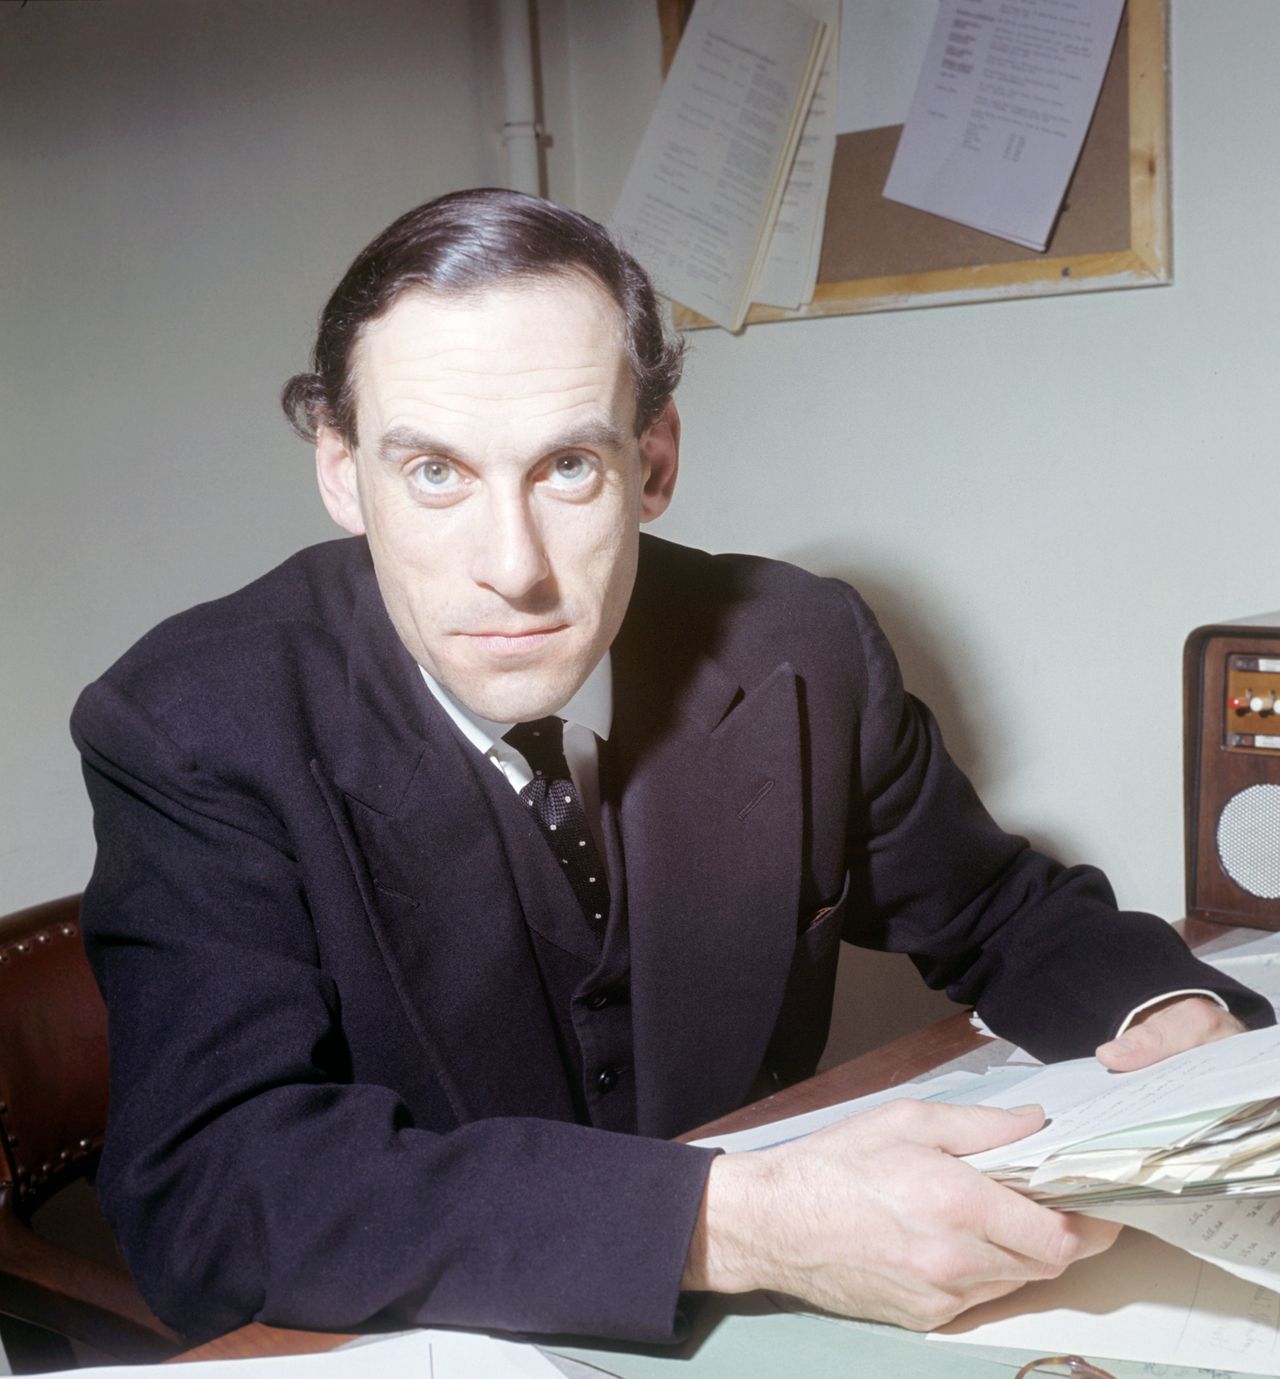 Jeremy Thorpe, pictured shortly after becoming the leader of the Liberal Party